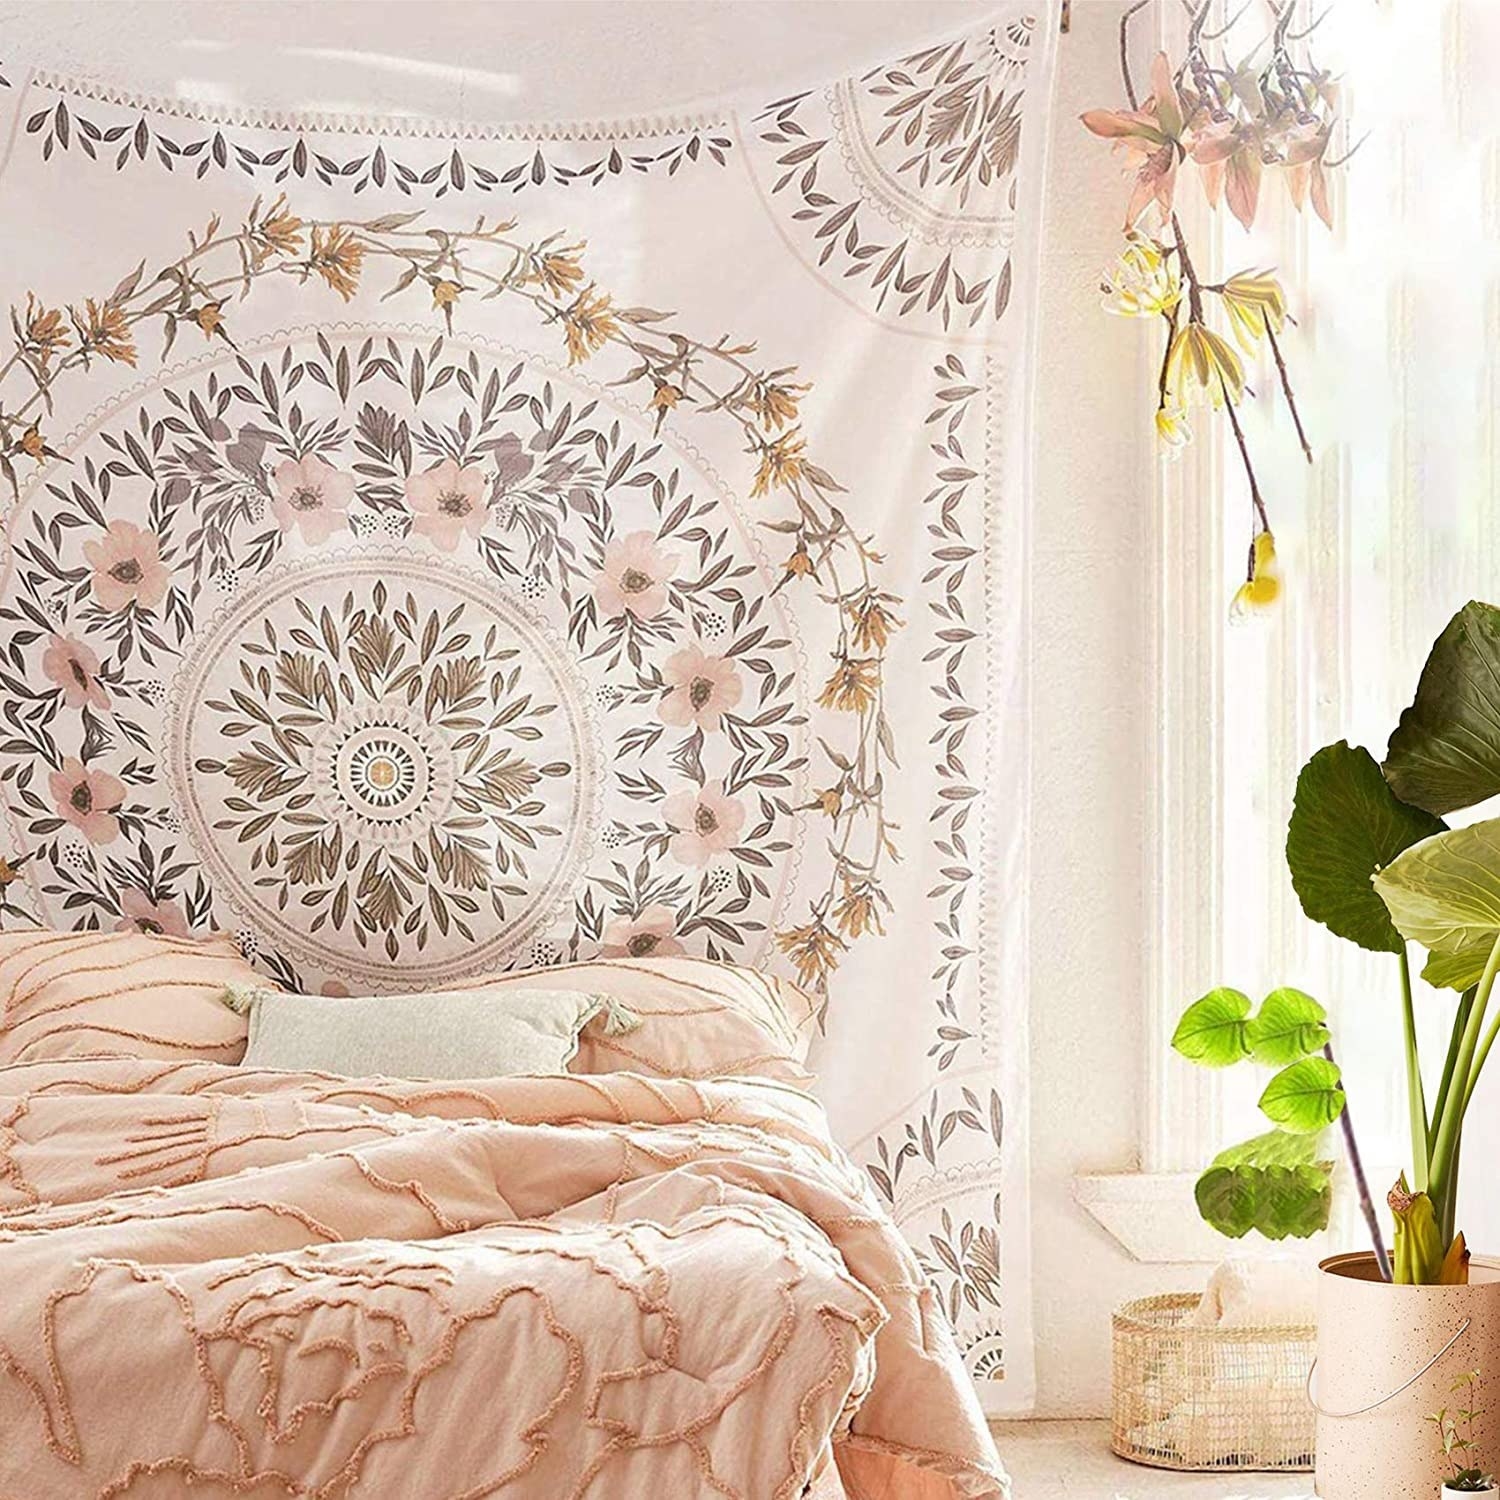 a floral tapestry hanging behind a bed